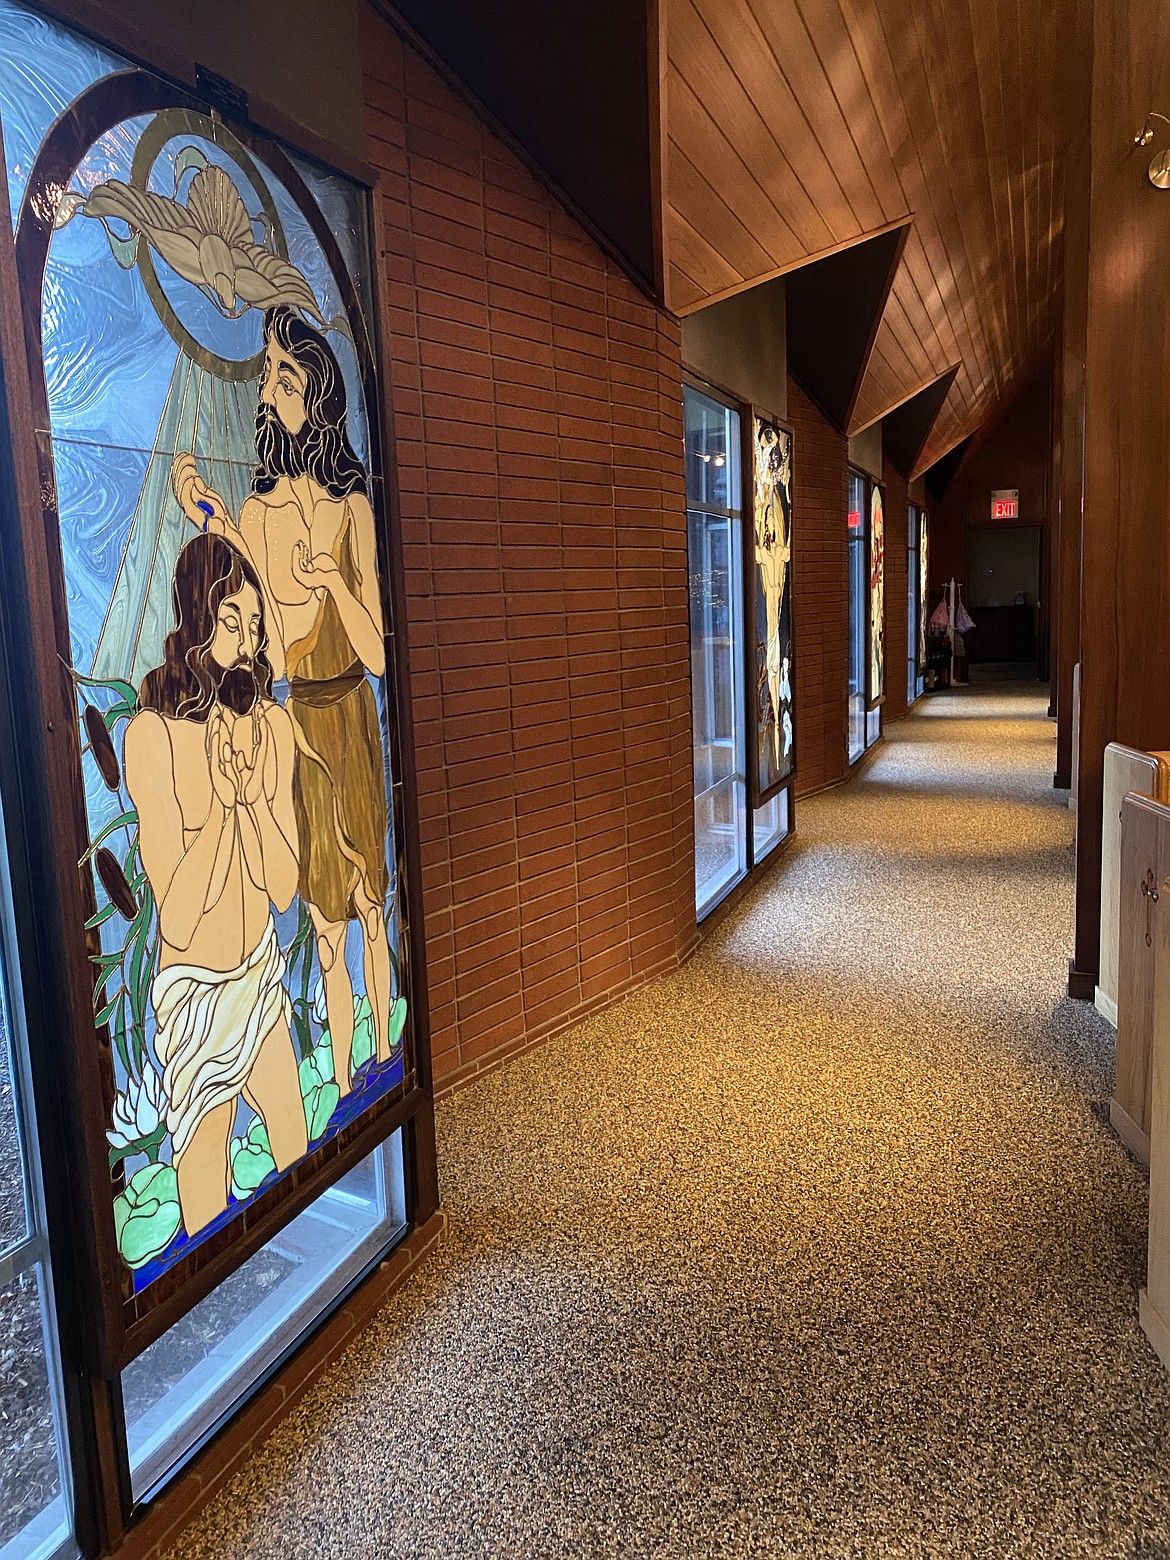 Stained-glass windows line a hallway within Trinity Lutheran Church on Fifth Street in Coeur d'Alene. Crafted by local artist Rebecca Ames Anderson, the windows join a host of impressive art pieces by local artists.